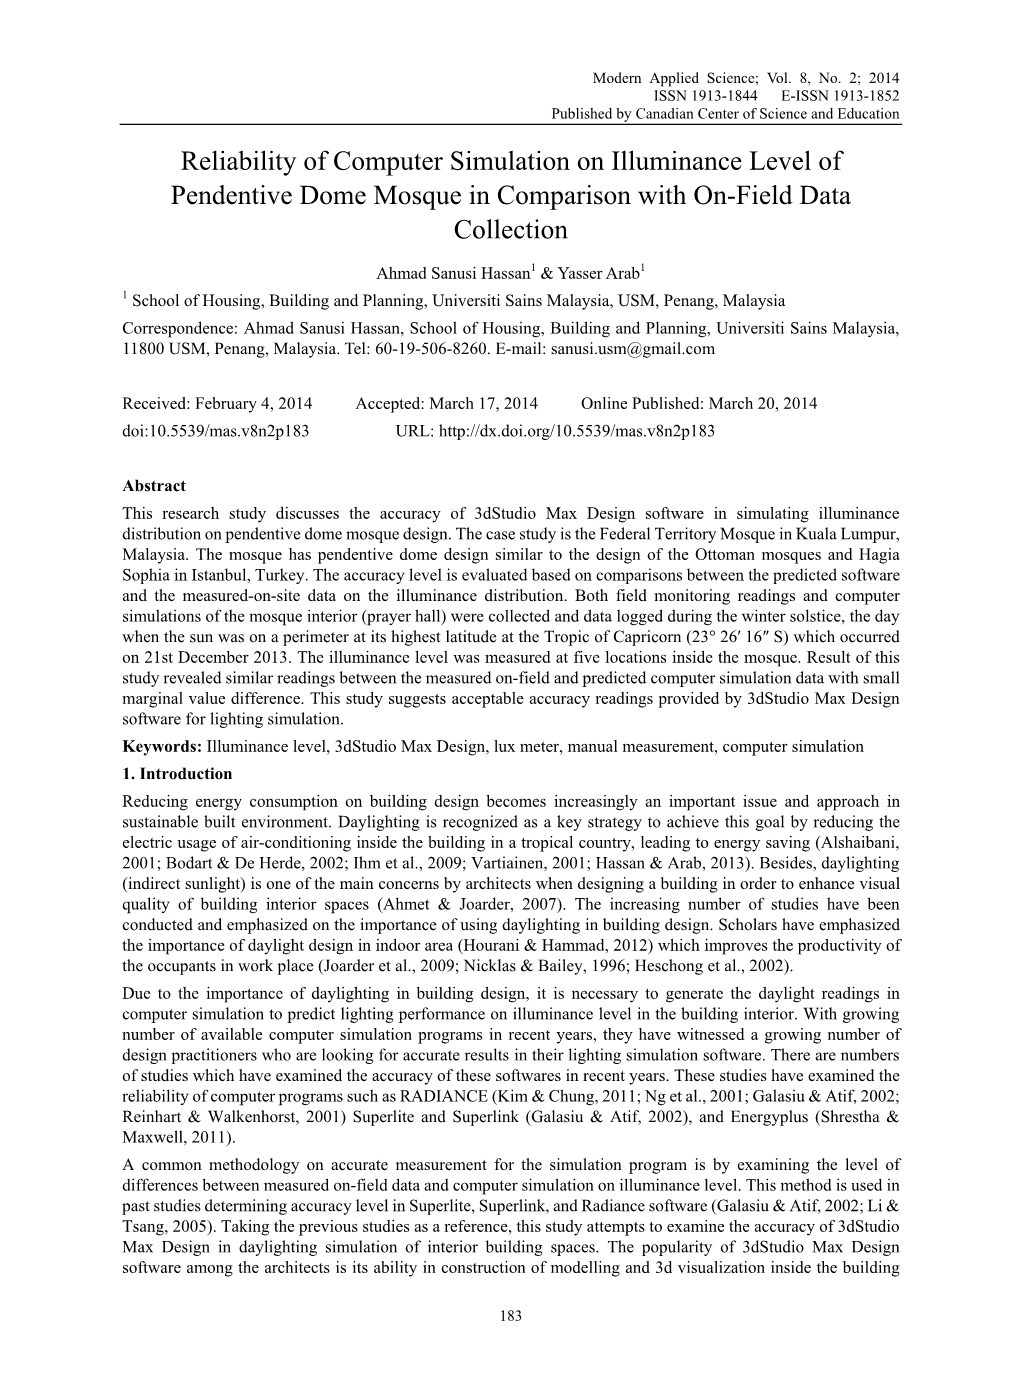 Reliability of Computer Simulation on Illuminance Level of Pendentive Dome Mosque in Comparison with On-Field Data Collection